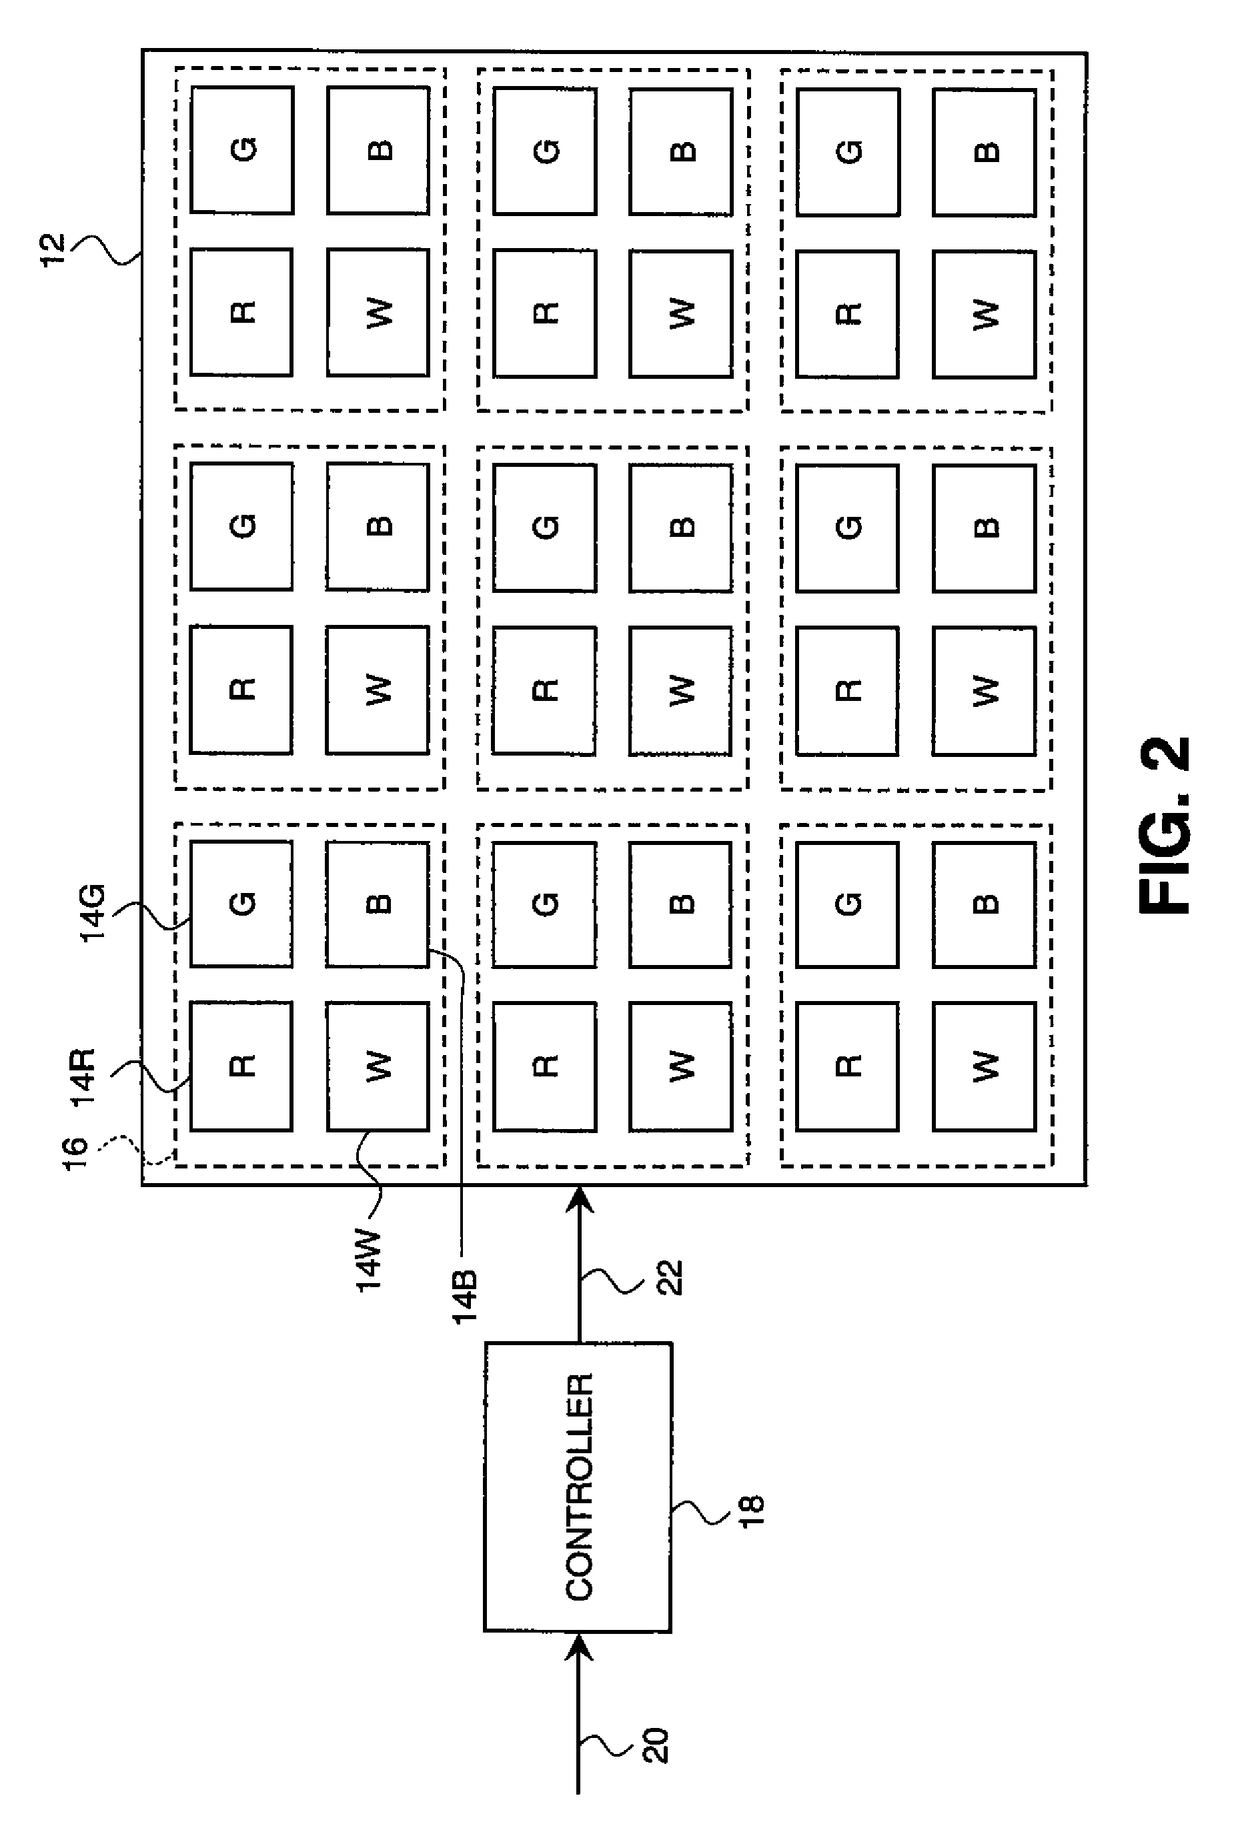 Method for dimming electroluminescent display